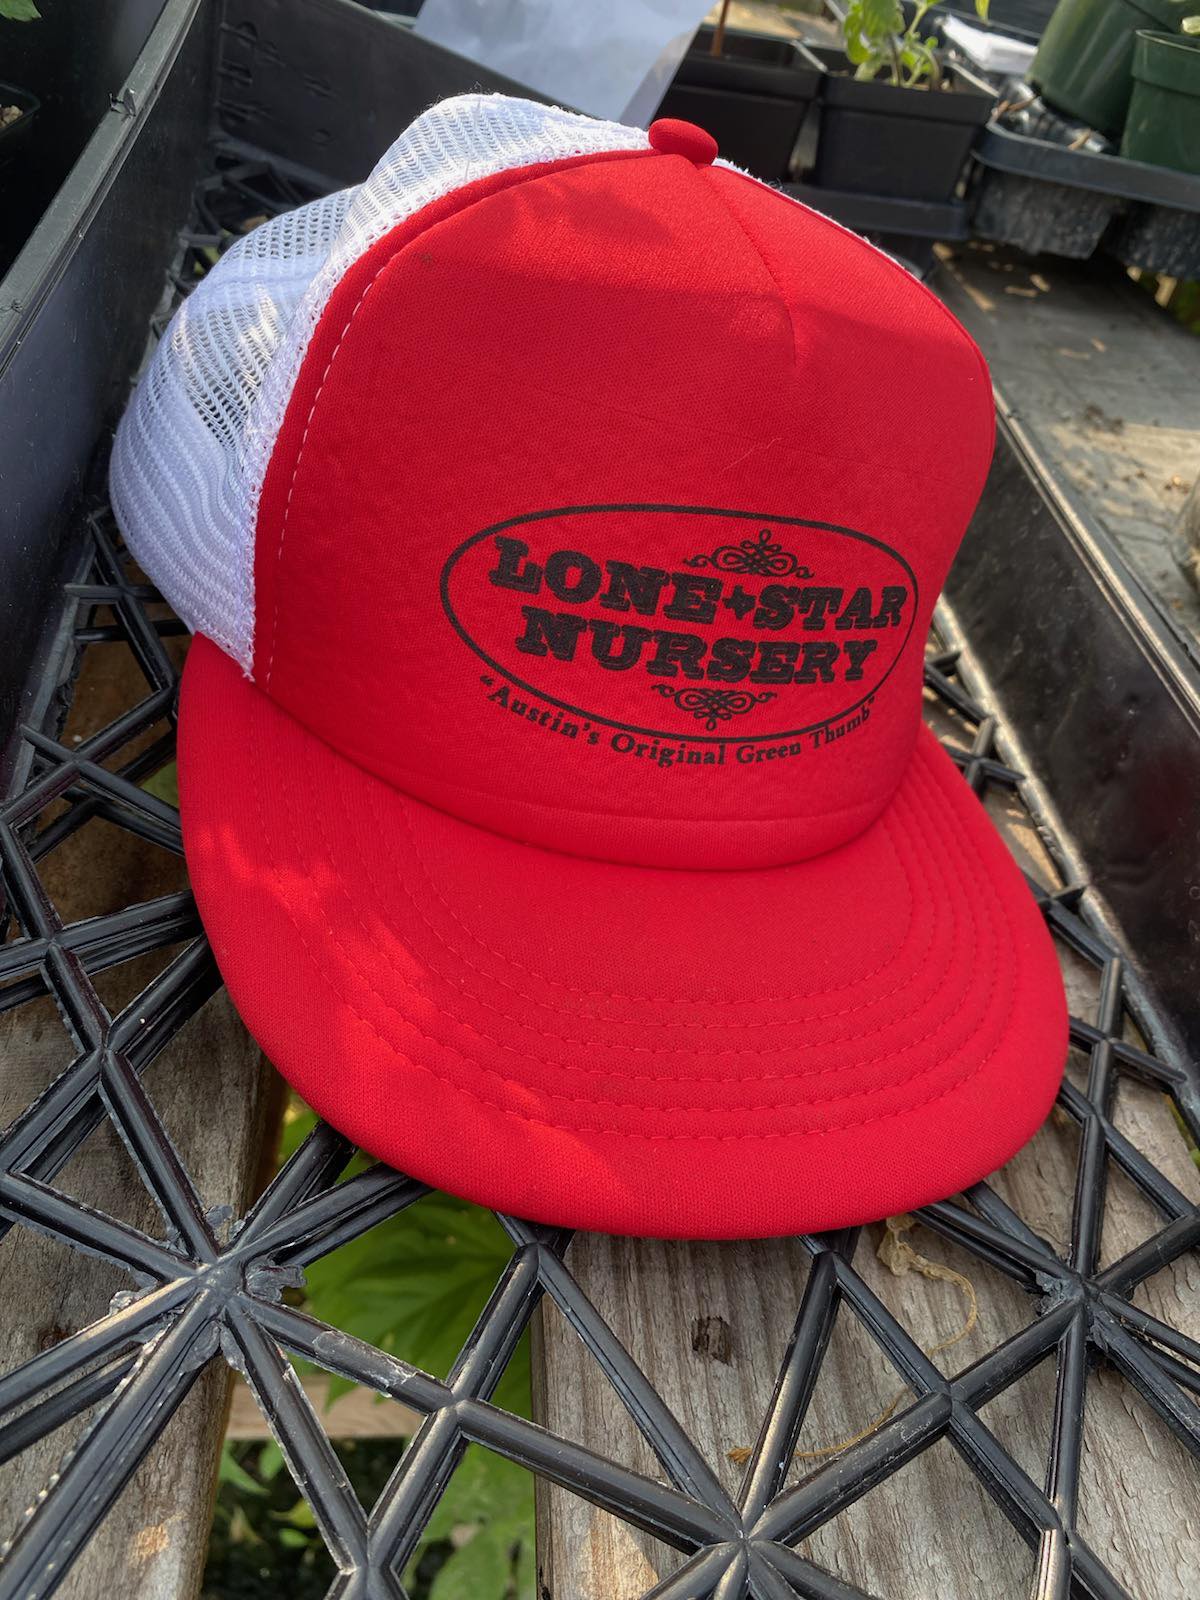 LSN TRUCKER HAT - Black on Red and White